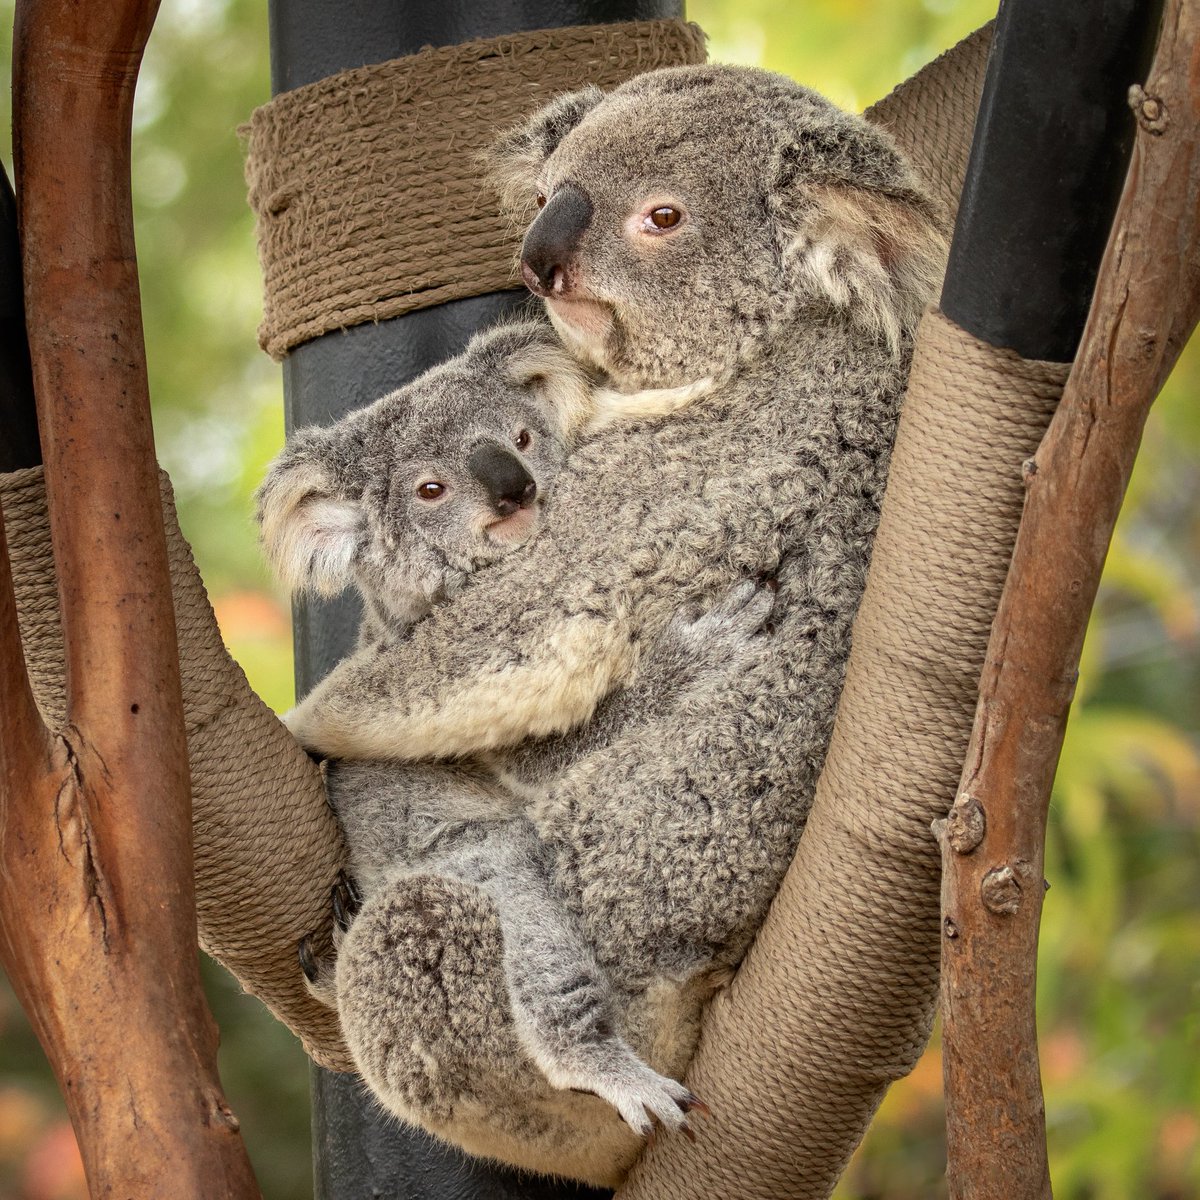 A top koality hug from our family to yours 💕 #KoalityPuns 📷: Penny Hyde https://t.co/hKM3C1I6v8